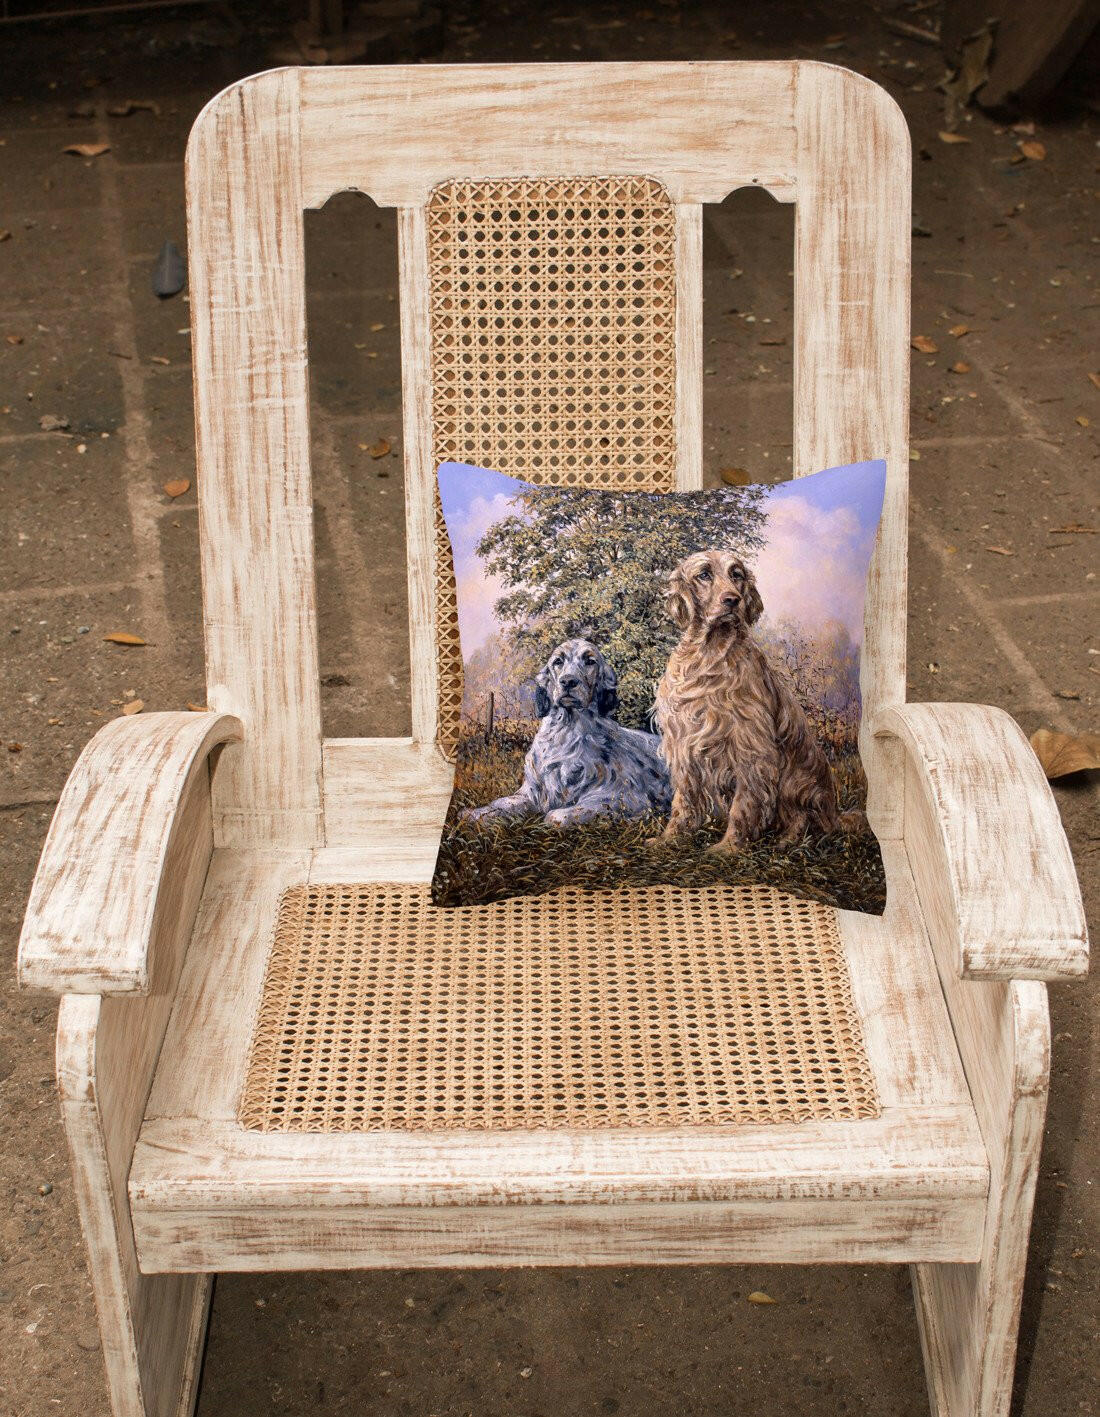 Setters by Michael Herring Canvas Decorative Pillow HMHE0203PW1414 by Caroline's Treasures